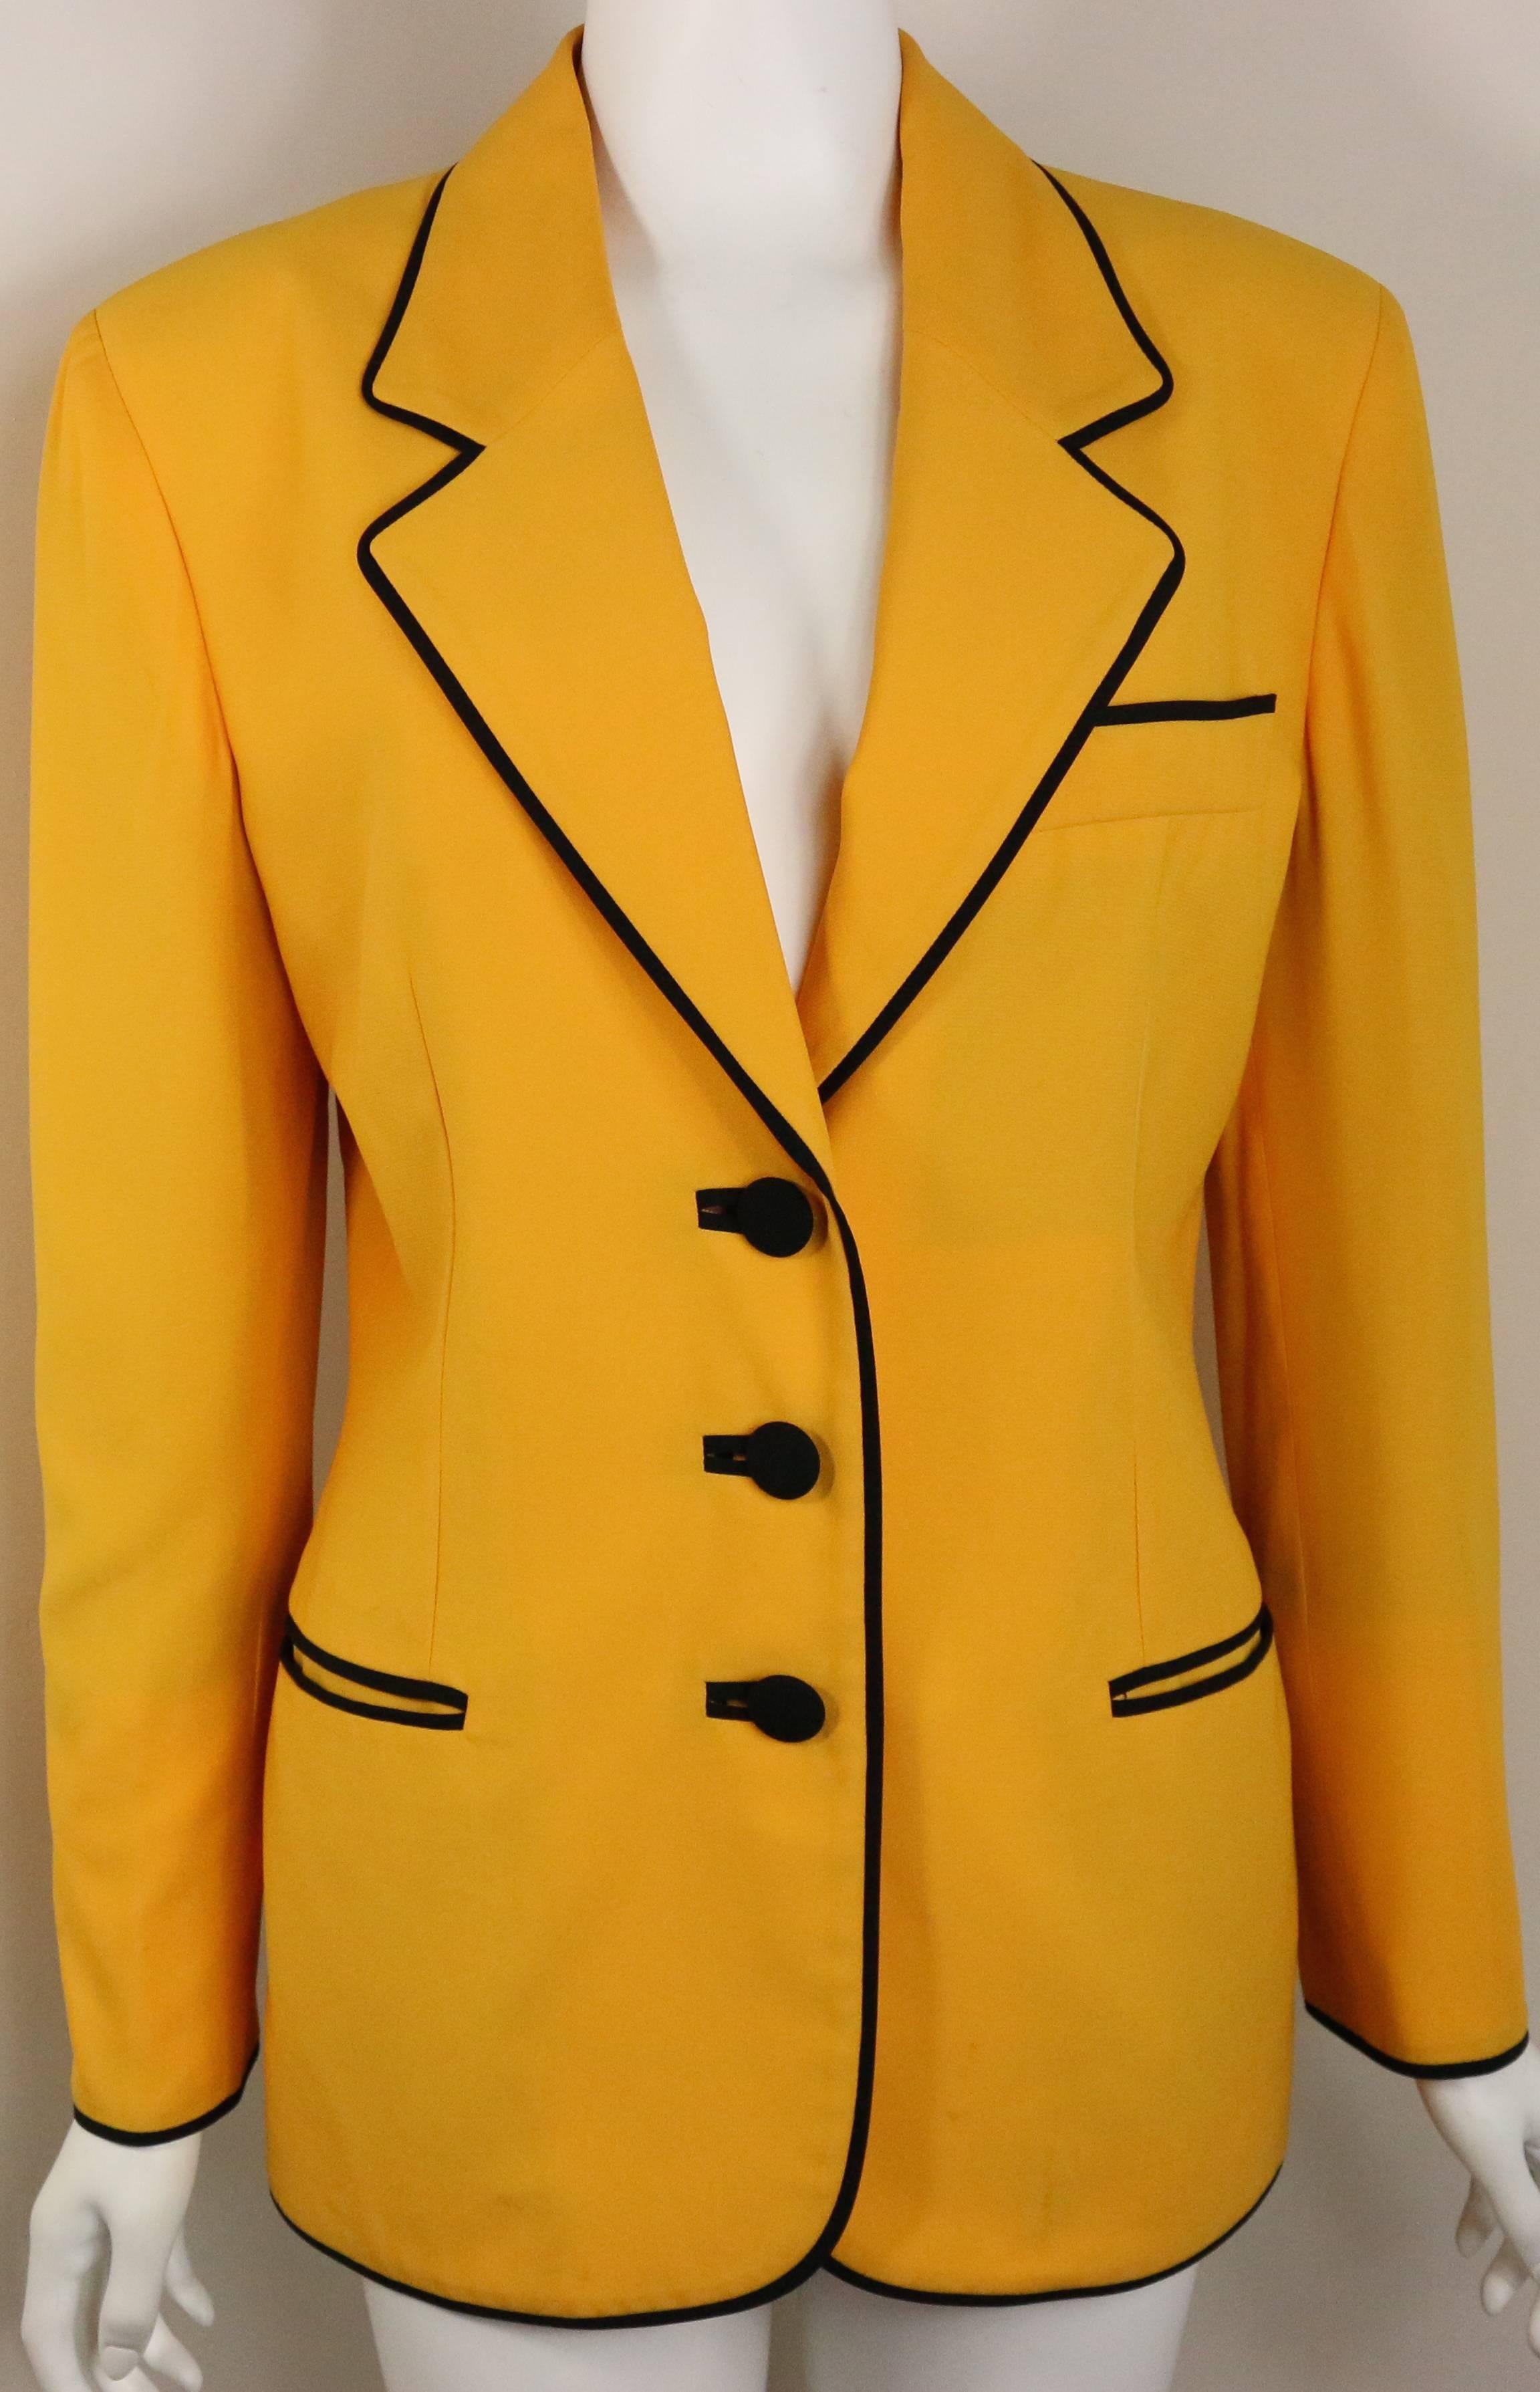 - Vintage 90s Moschino Couture yellow black piping blazer with iconic black "smiley" face displayed at the back. 

- Featuring black piping with three front black buttons fastening.  Four black buttons on each cuff. 

- Made in Italy. 

-